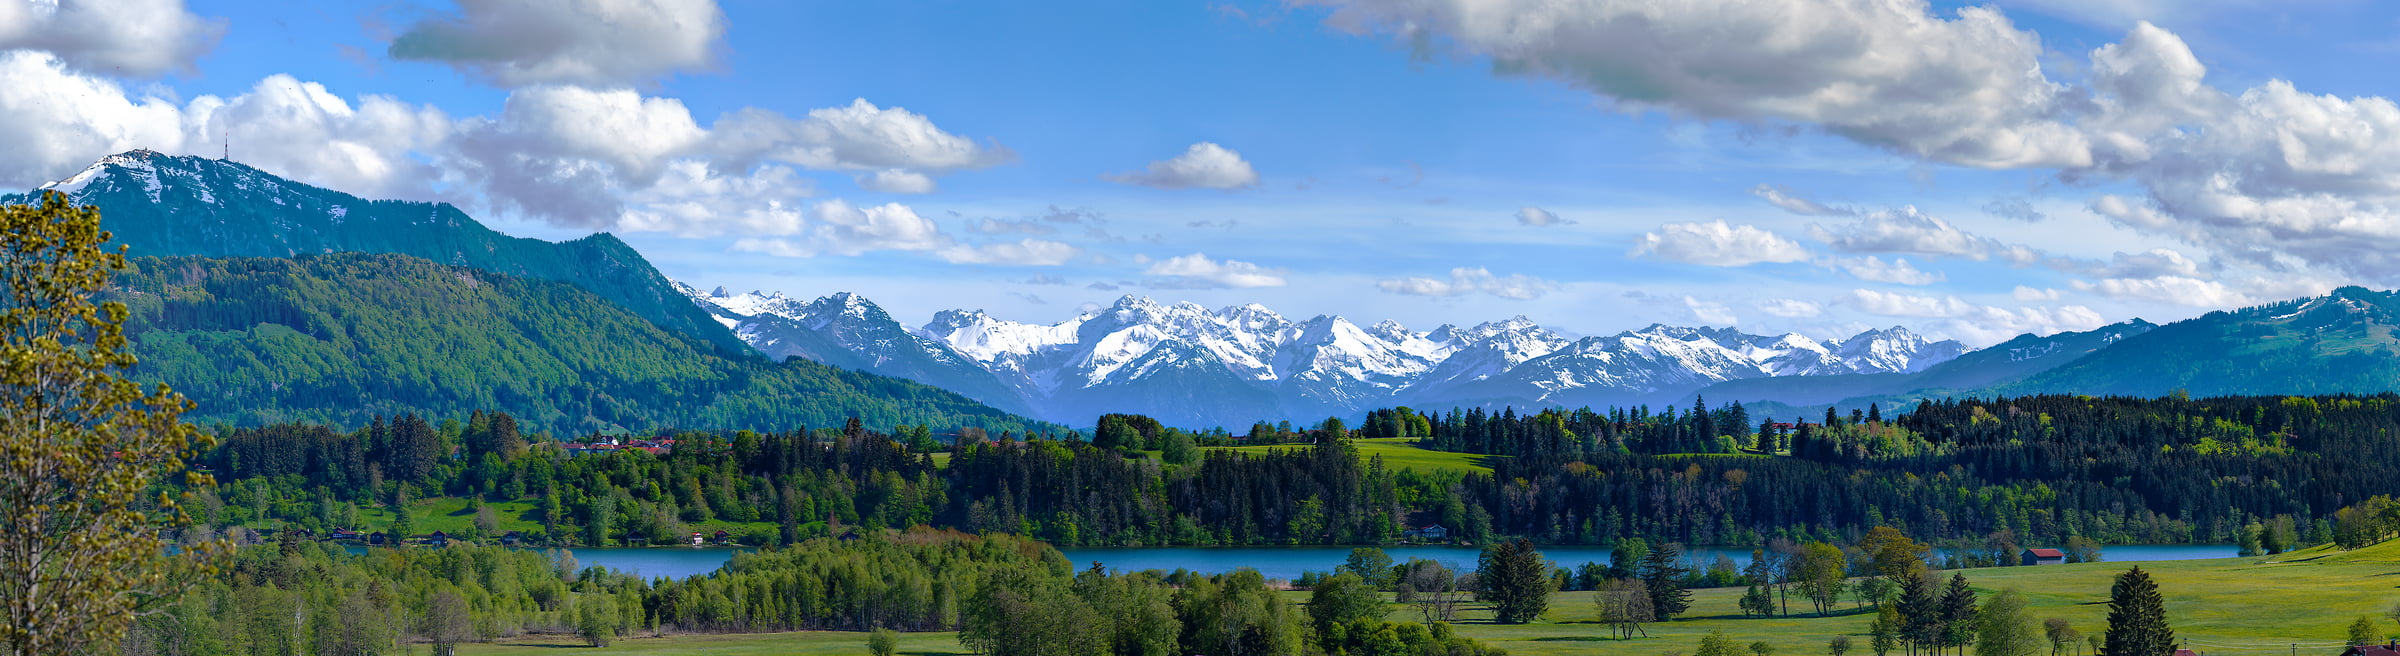 691 megapixels! A very high resolution panorama photo of a German landscape; photograph created by Alfred Feil in Lake Niedersonthofen, Allgaeu, Bavaria, Germany.